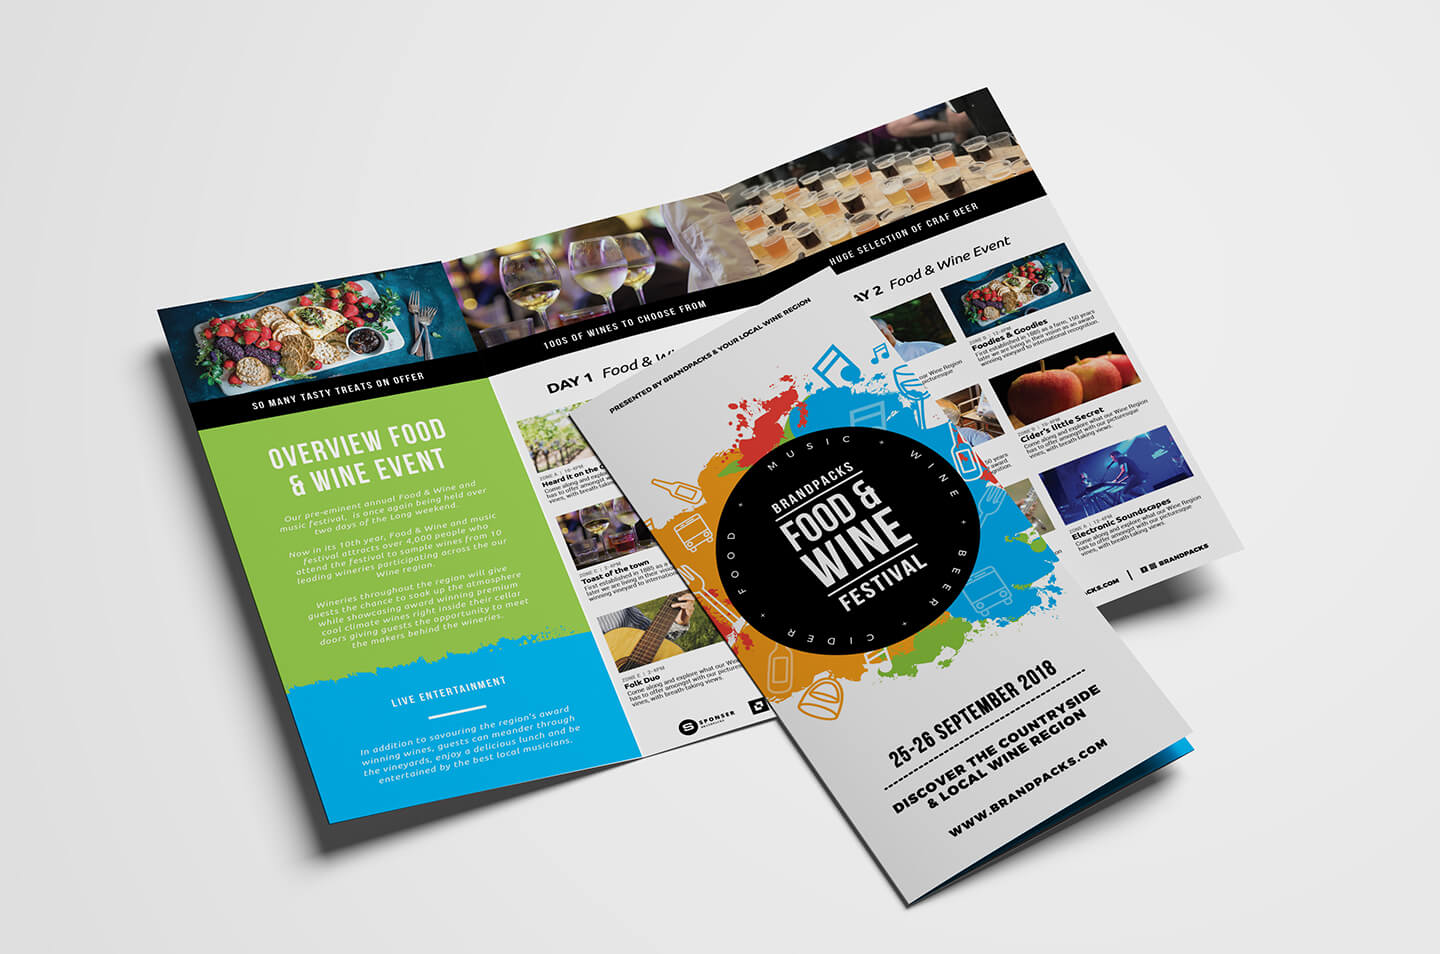 Free Tri Fold Brochure Template For Events & Festivals – Psd Regarding 3 Fold Brochure Template Free